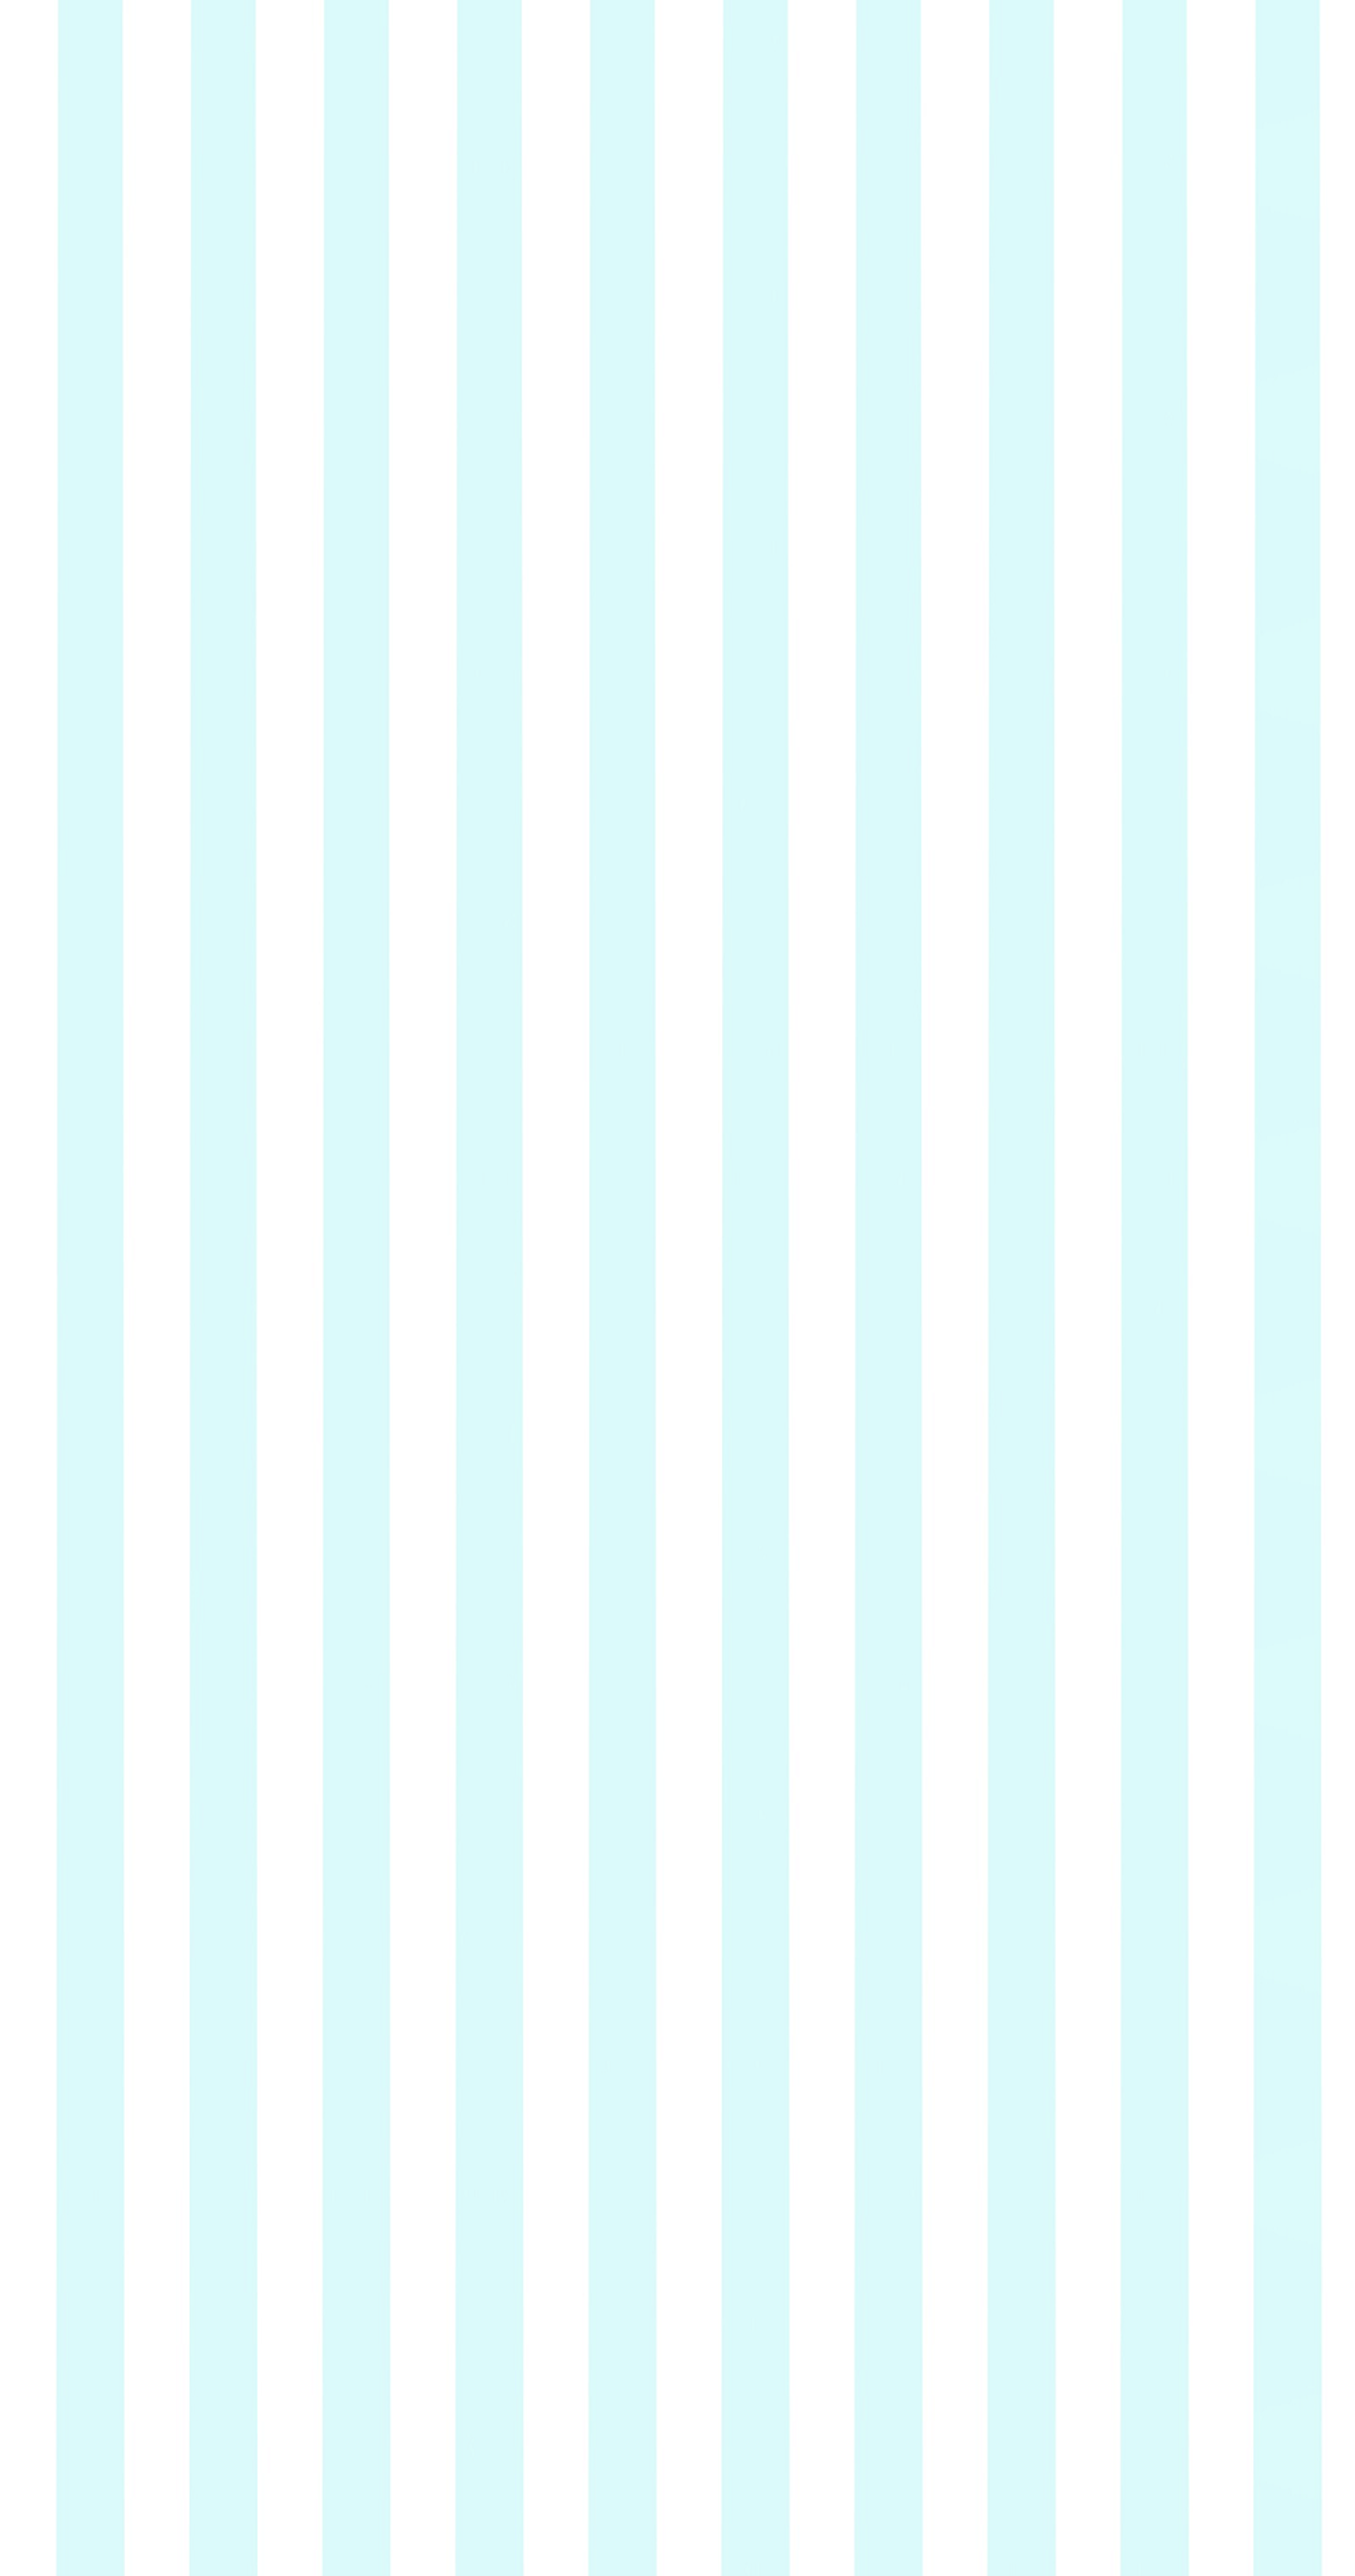 Baby Blue And White Striped Background Images Pictures   Becuo